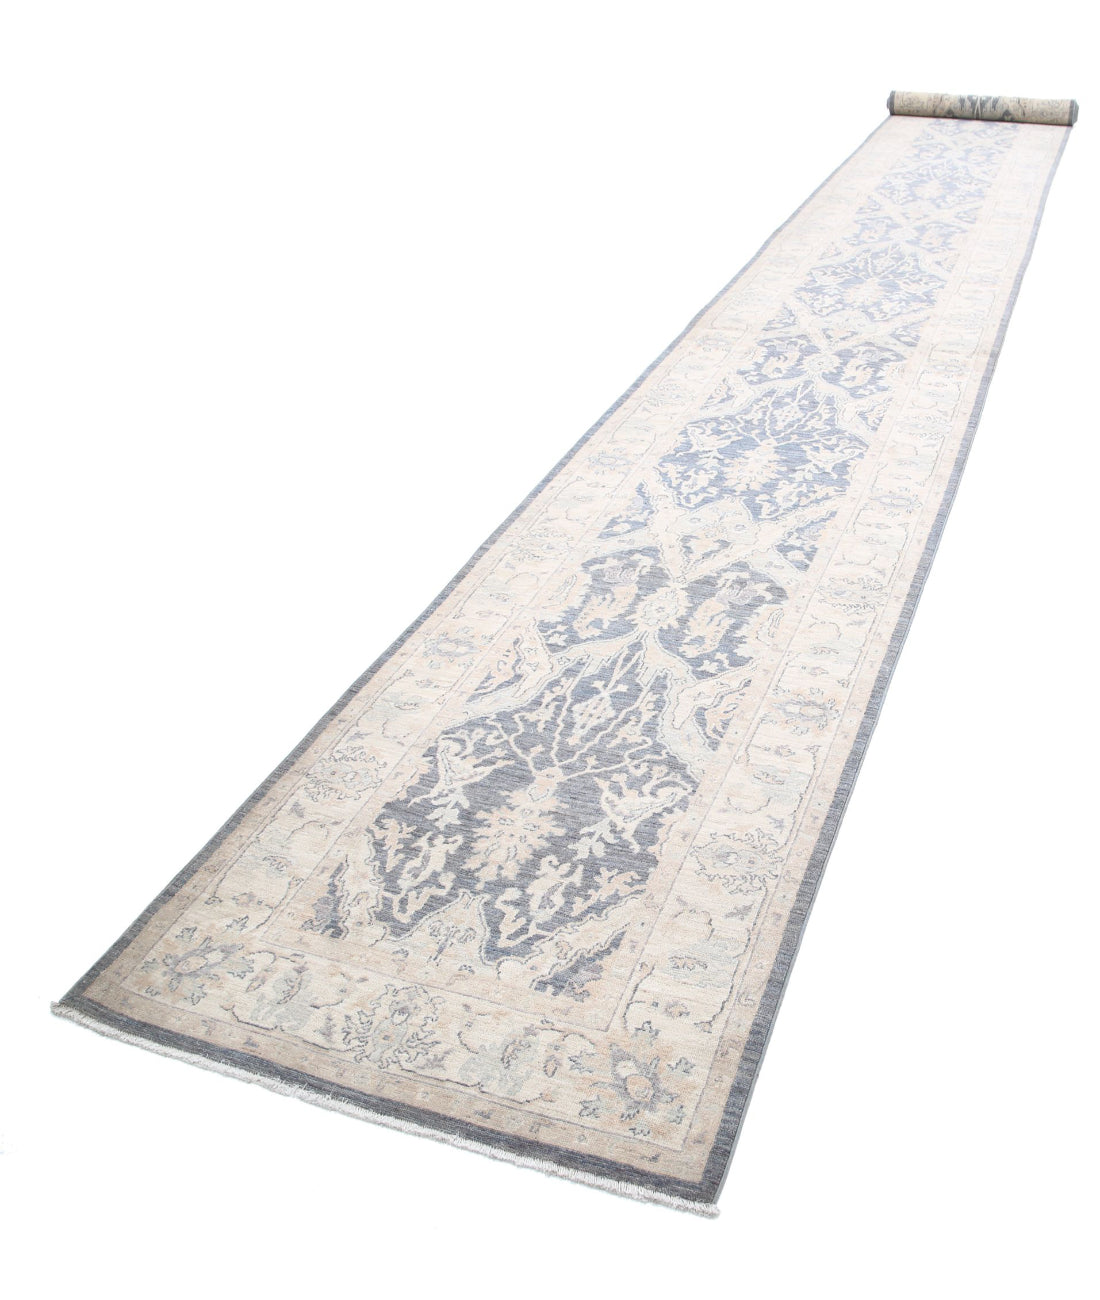 Hand Knotted Serenity Wool Rug - 3'3'' x 25'10'' 3'3'' x 25'10'' (98 X 775) / Grey / Ivory